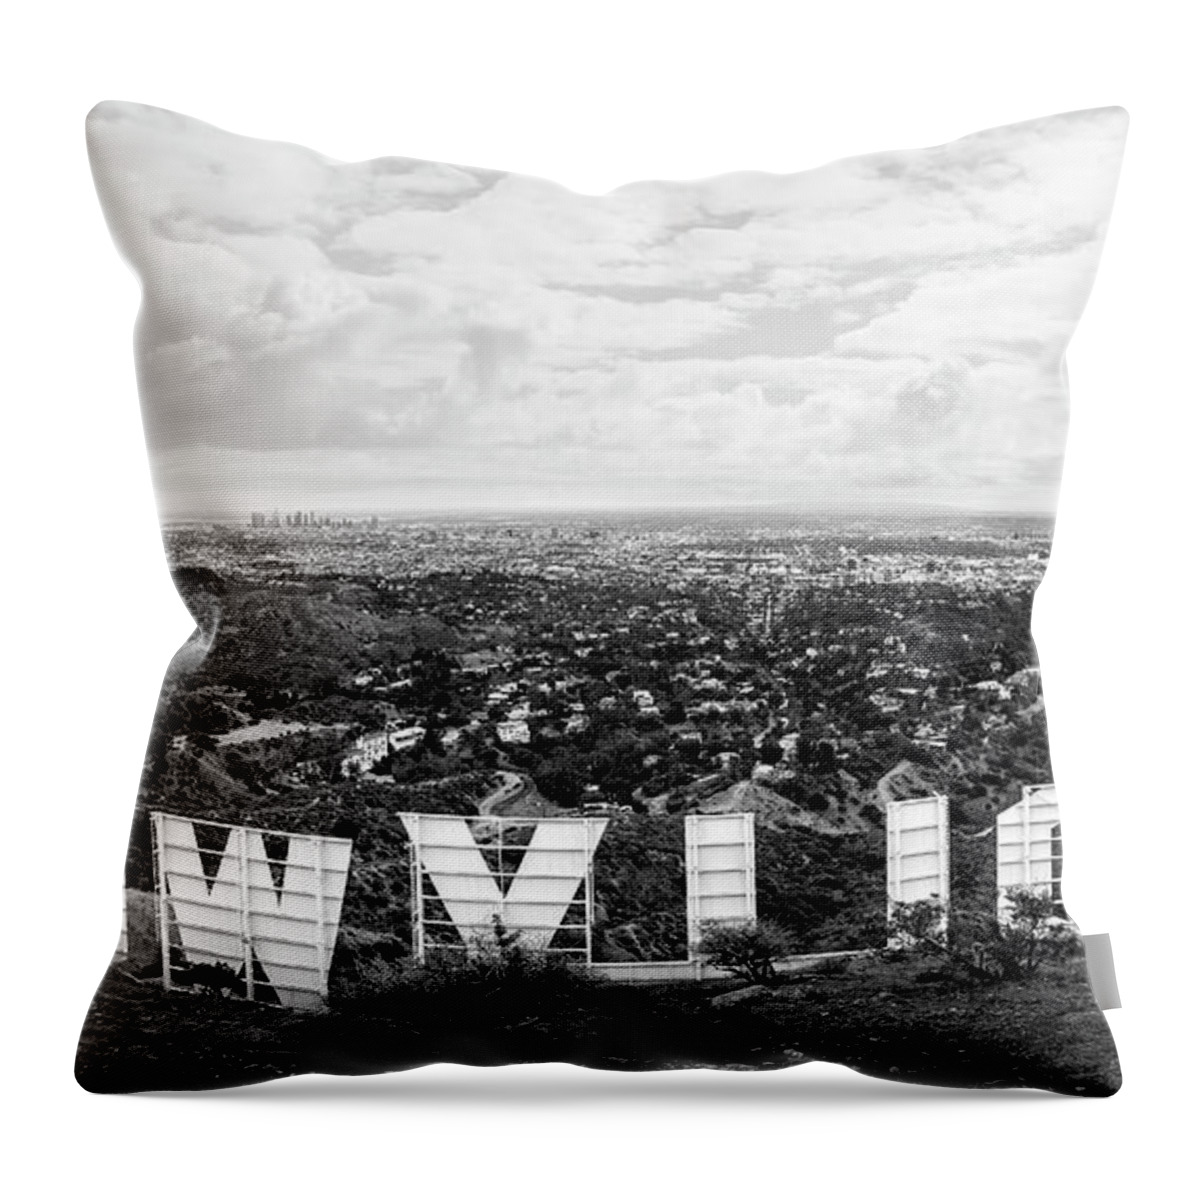 Hollywood Throw Pillow featuring the photograph Hollywood Sign overlooking Los Angeles by Patrick Van Os